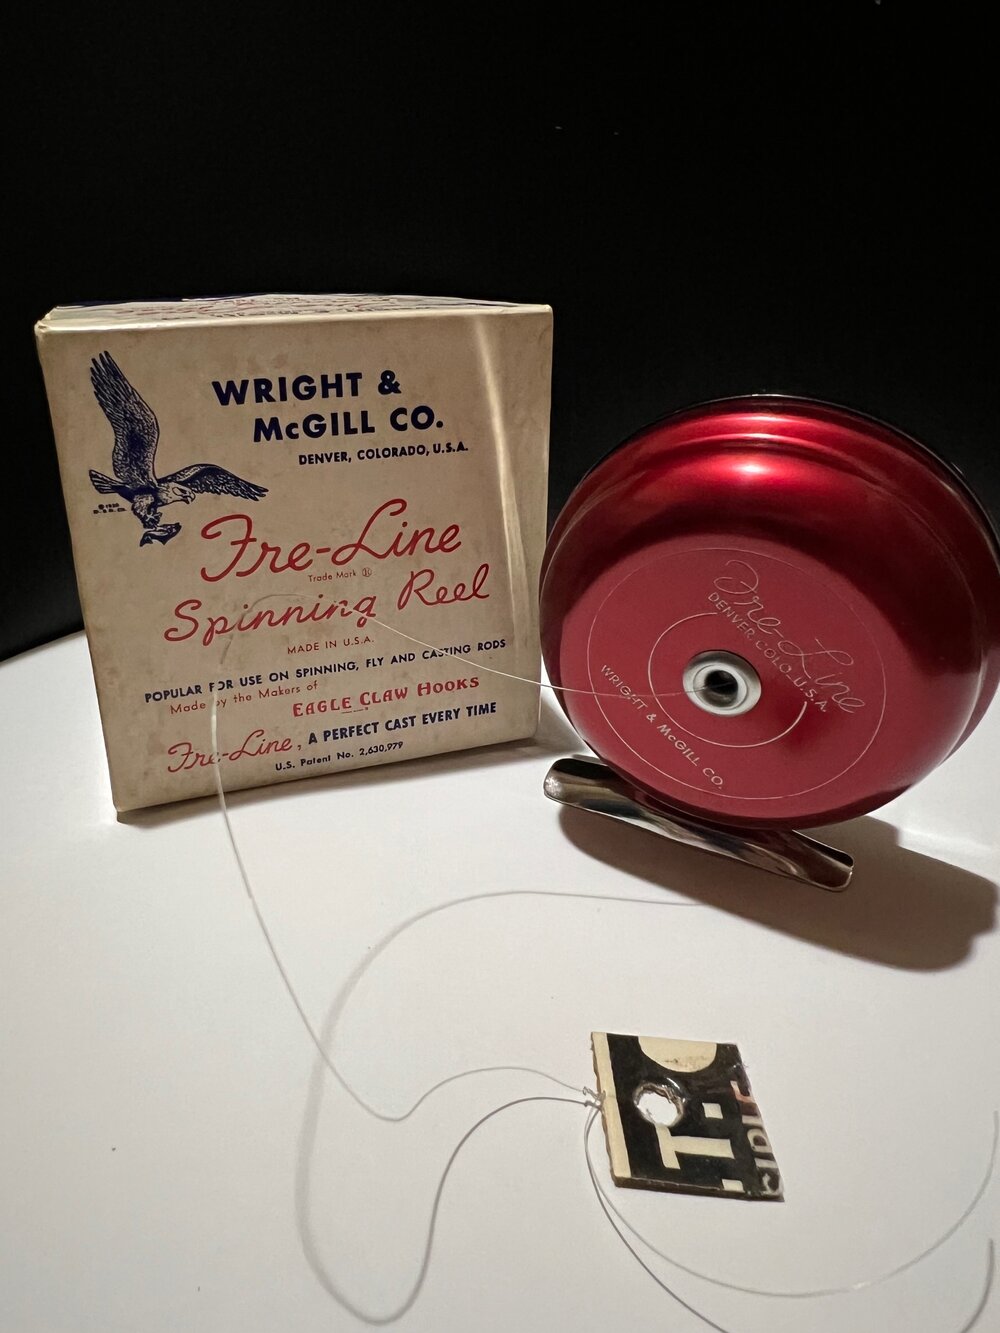 Wright & McGill Co. Fre-Line 10BC Spinning-Casting Reel with Original Box &  Manual Circa-1955 — VINTAGE FISHING REELS